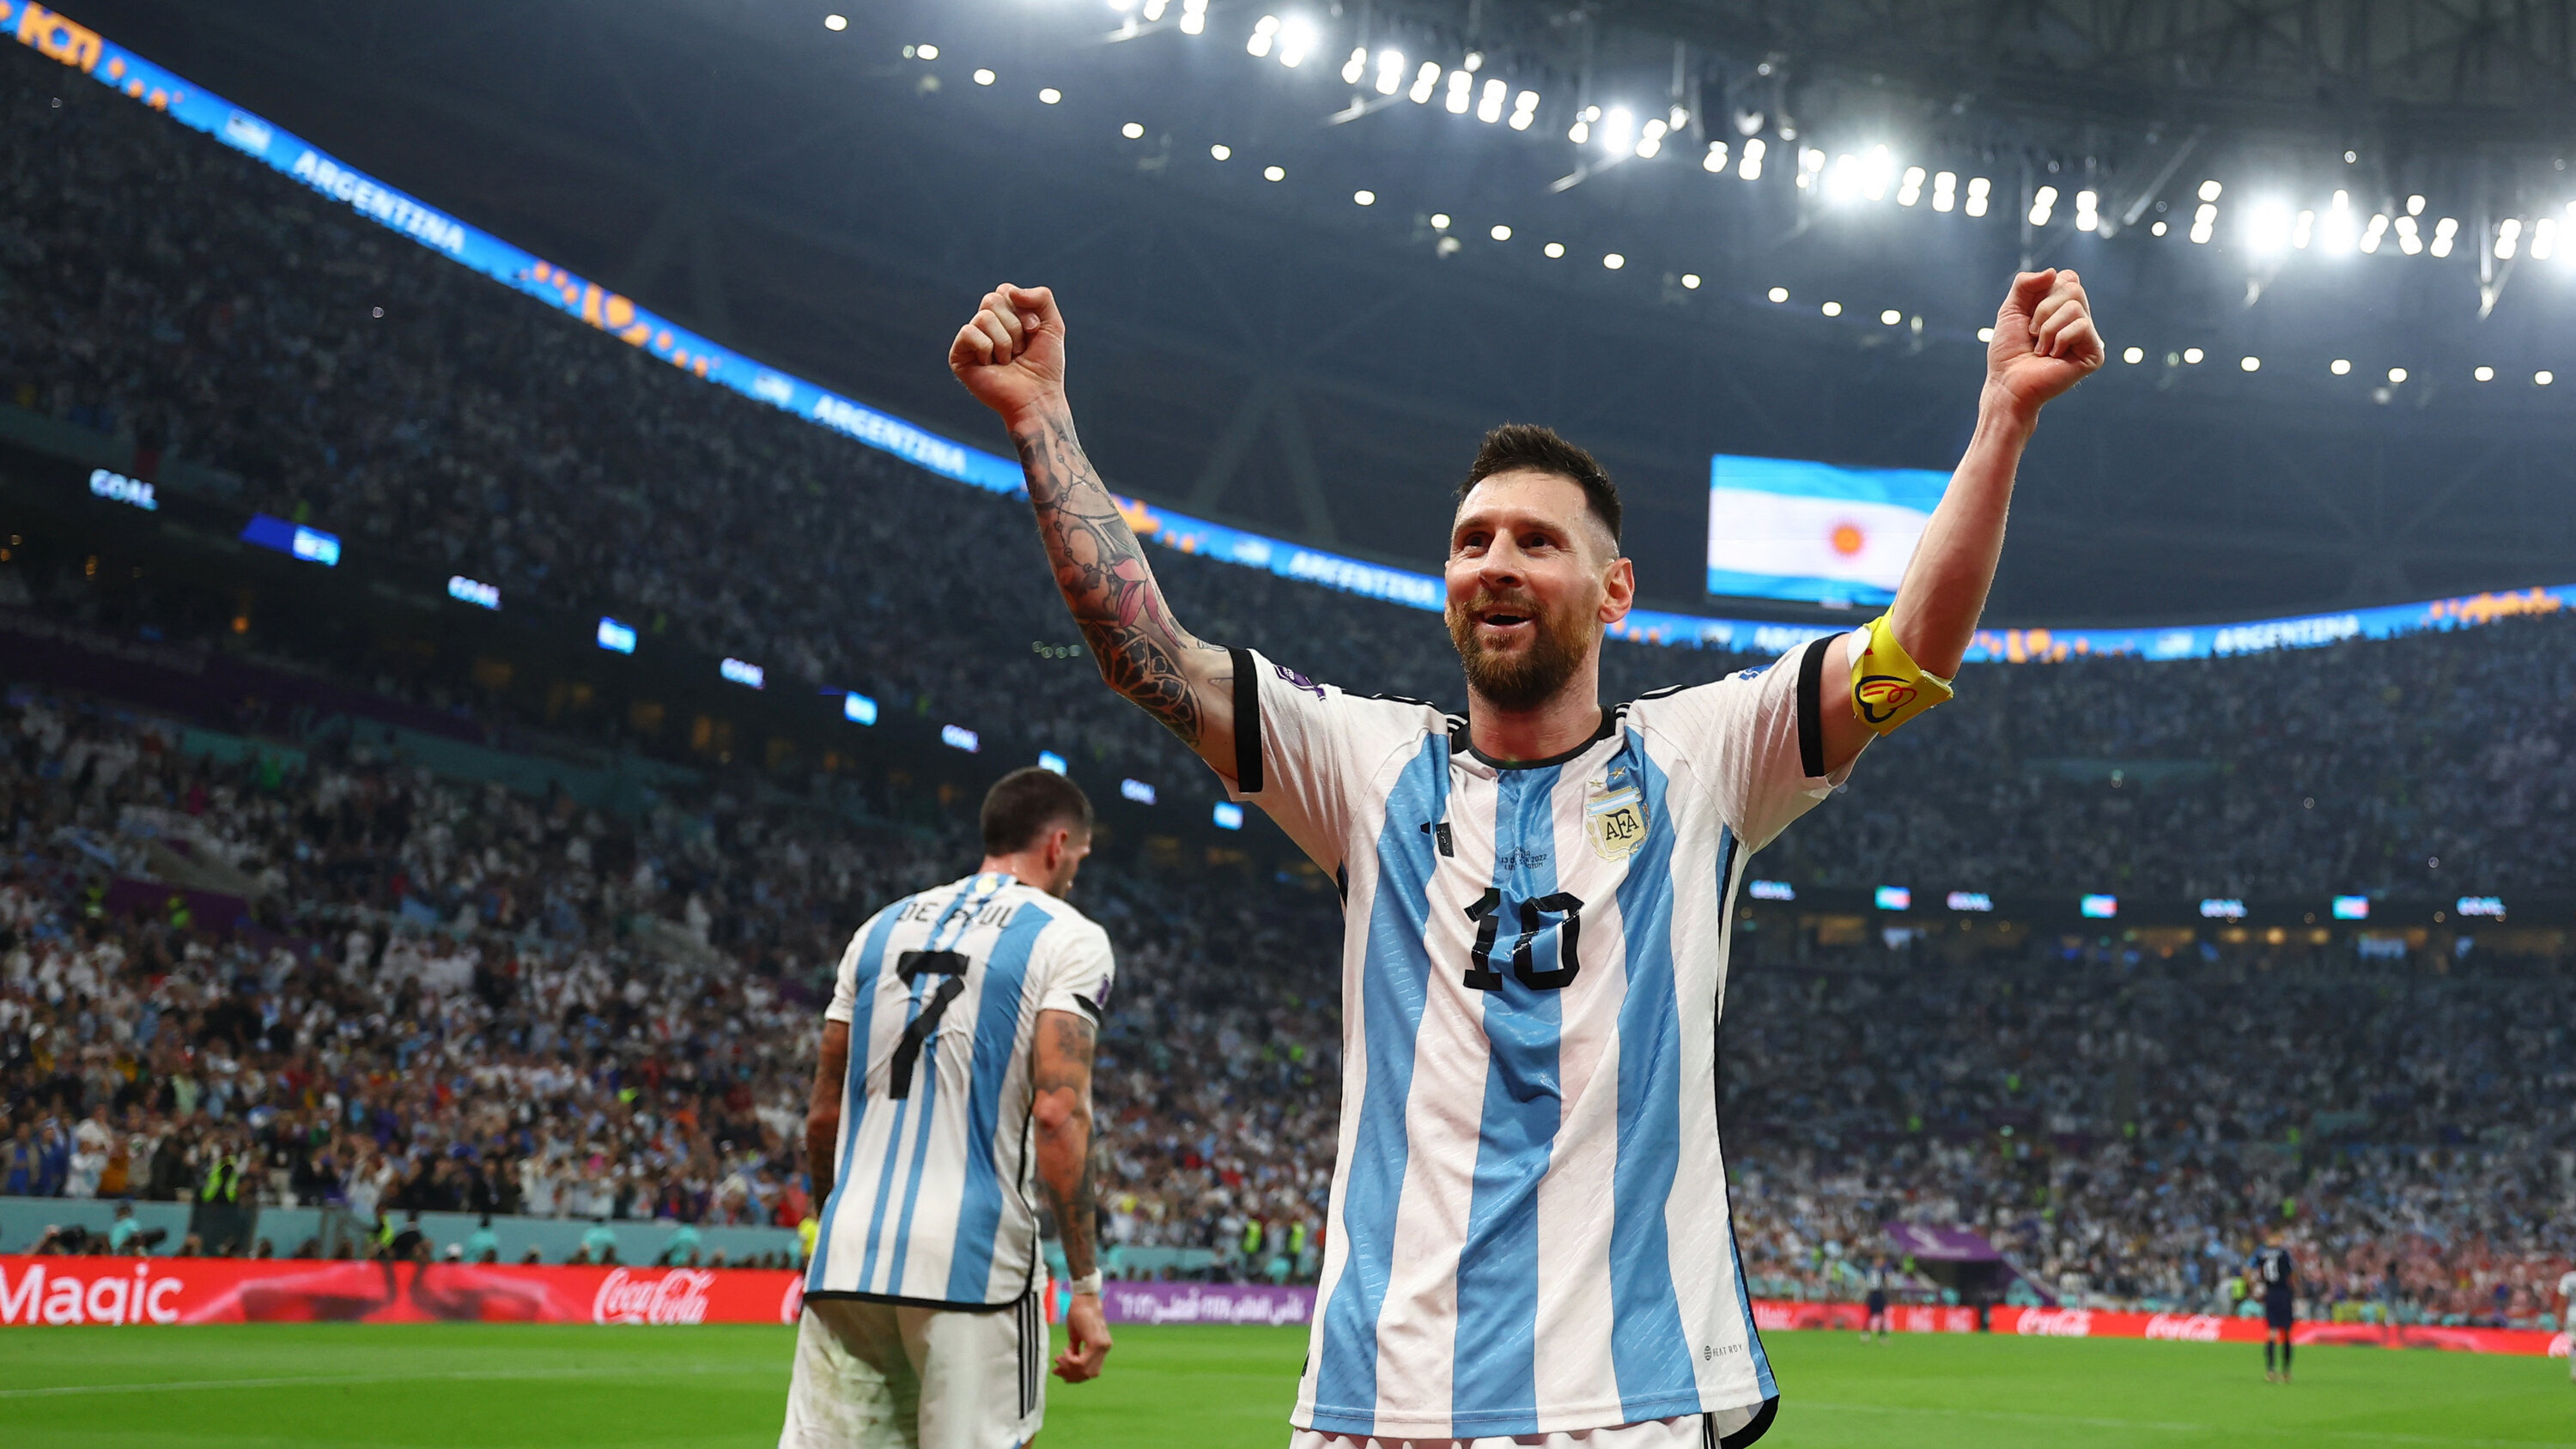 Messi and Argentina Are Headed to the World Cup Finals